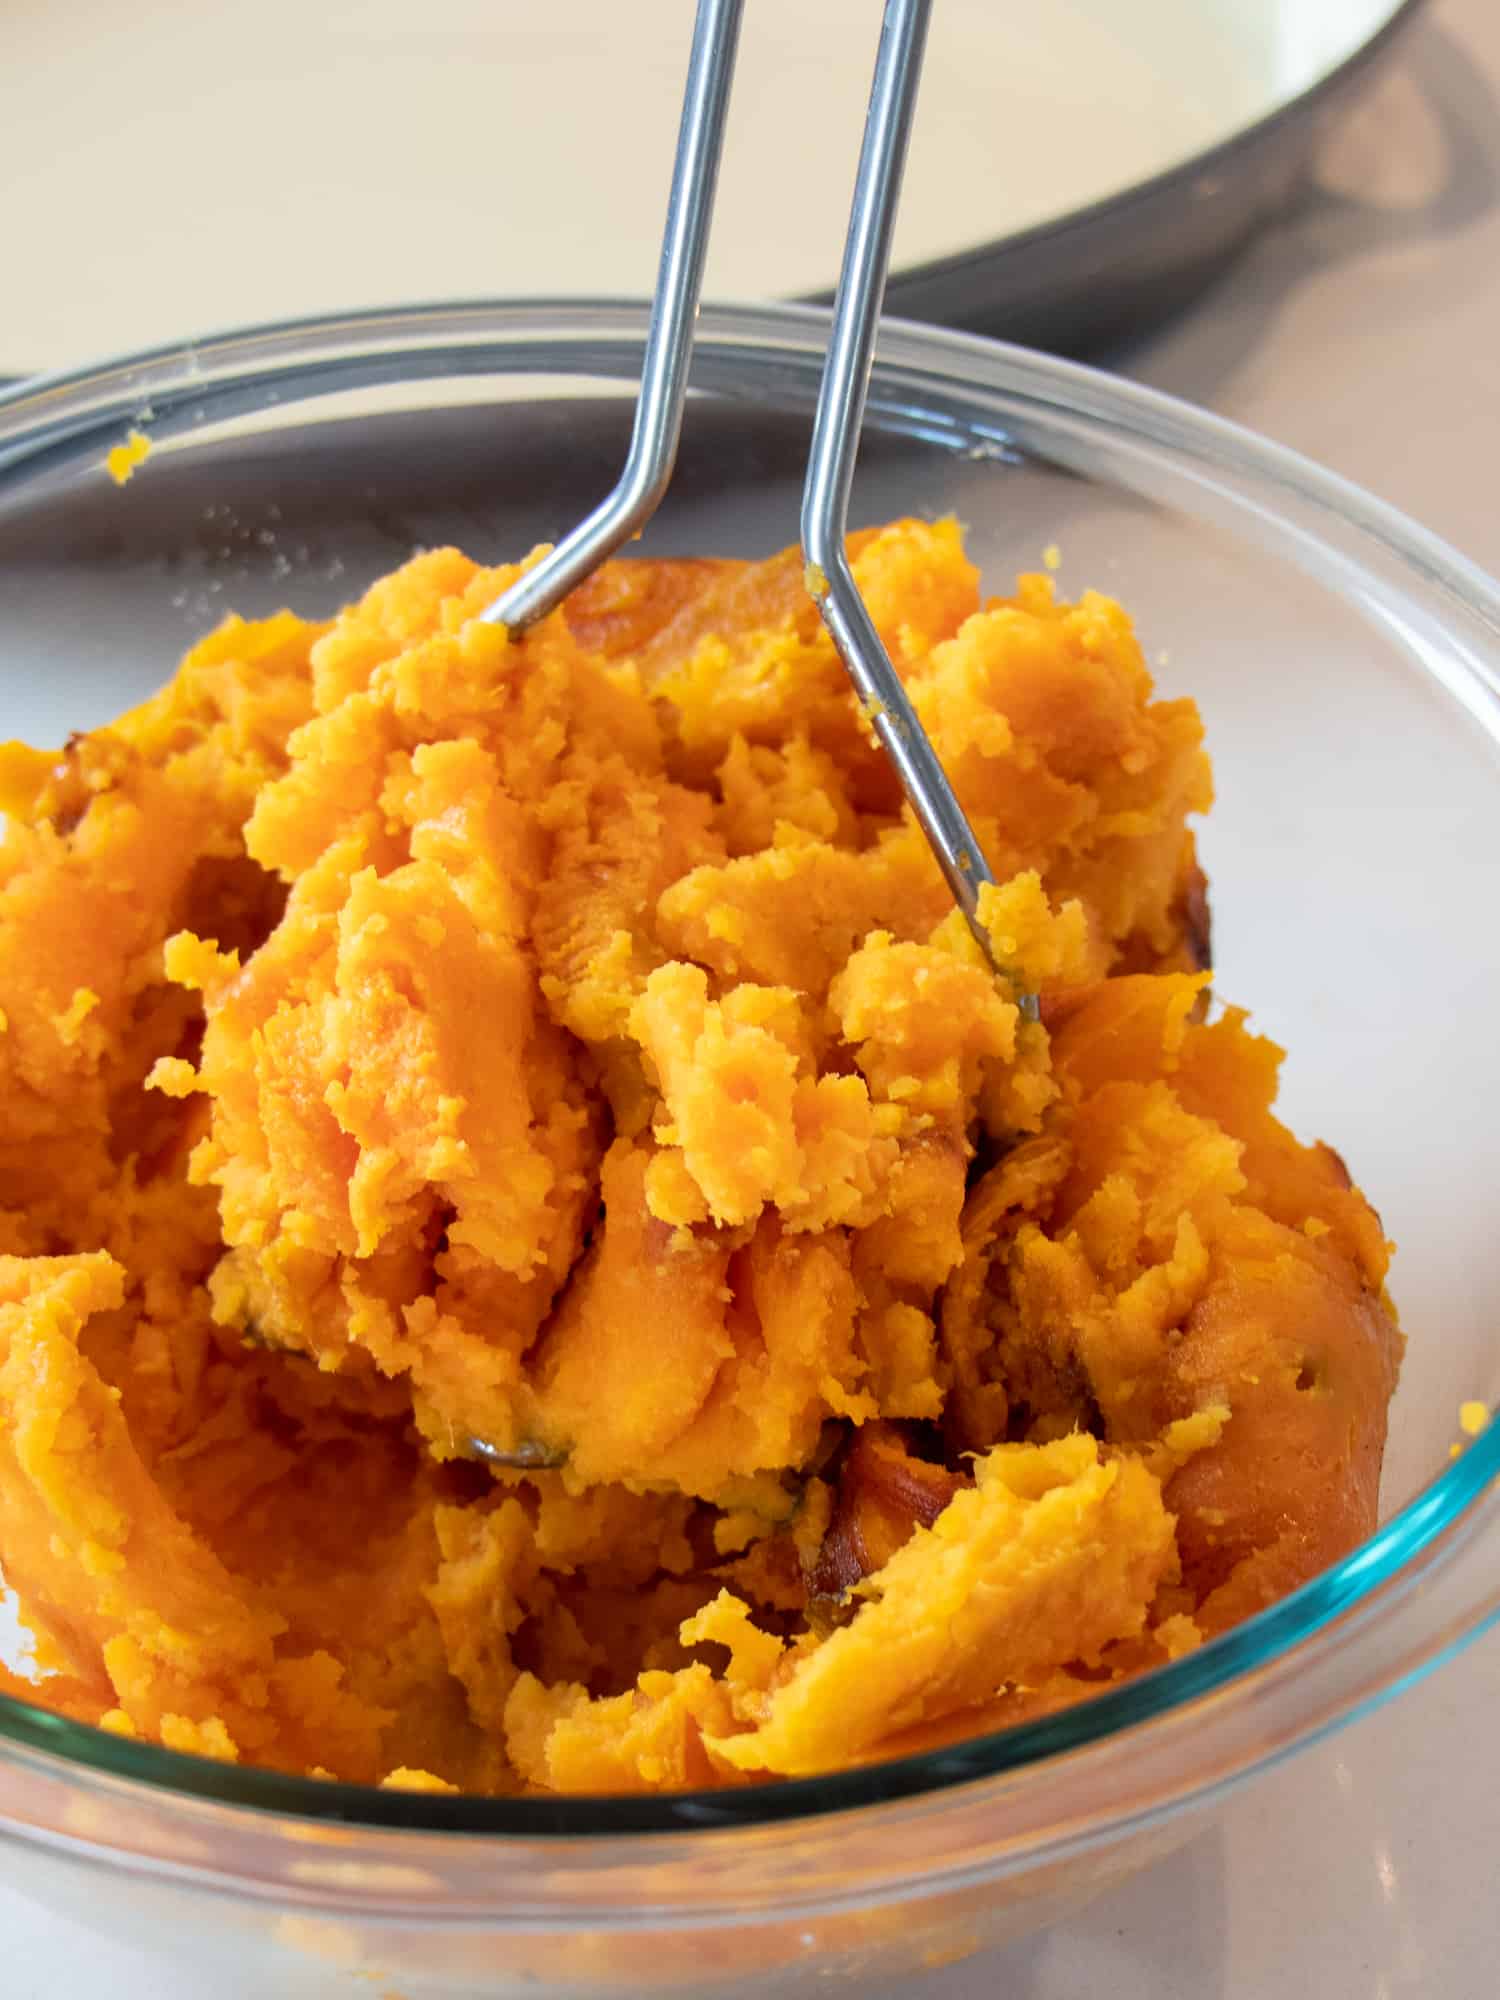 A bowl of cooked sweet potatoes being mashed with a potato hand masher.